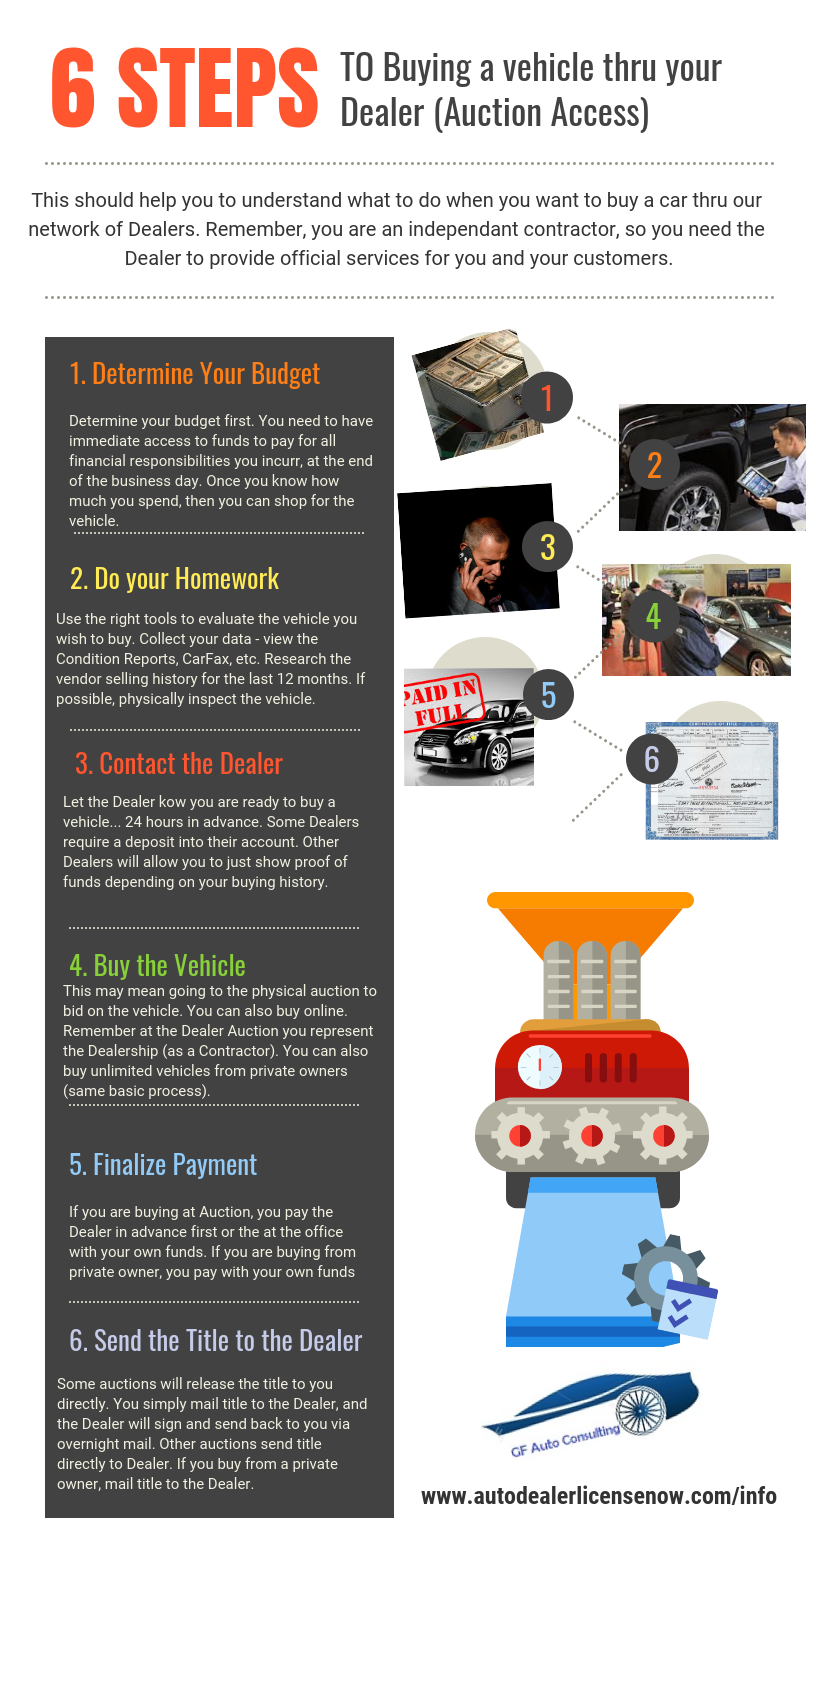 6 steps to buying a car